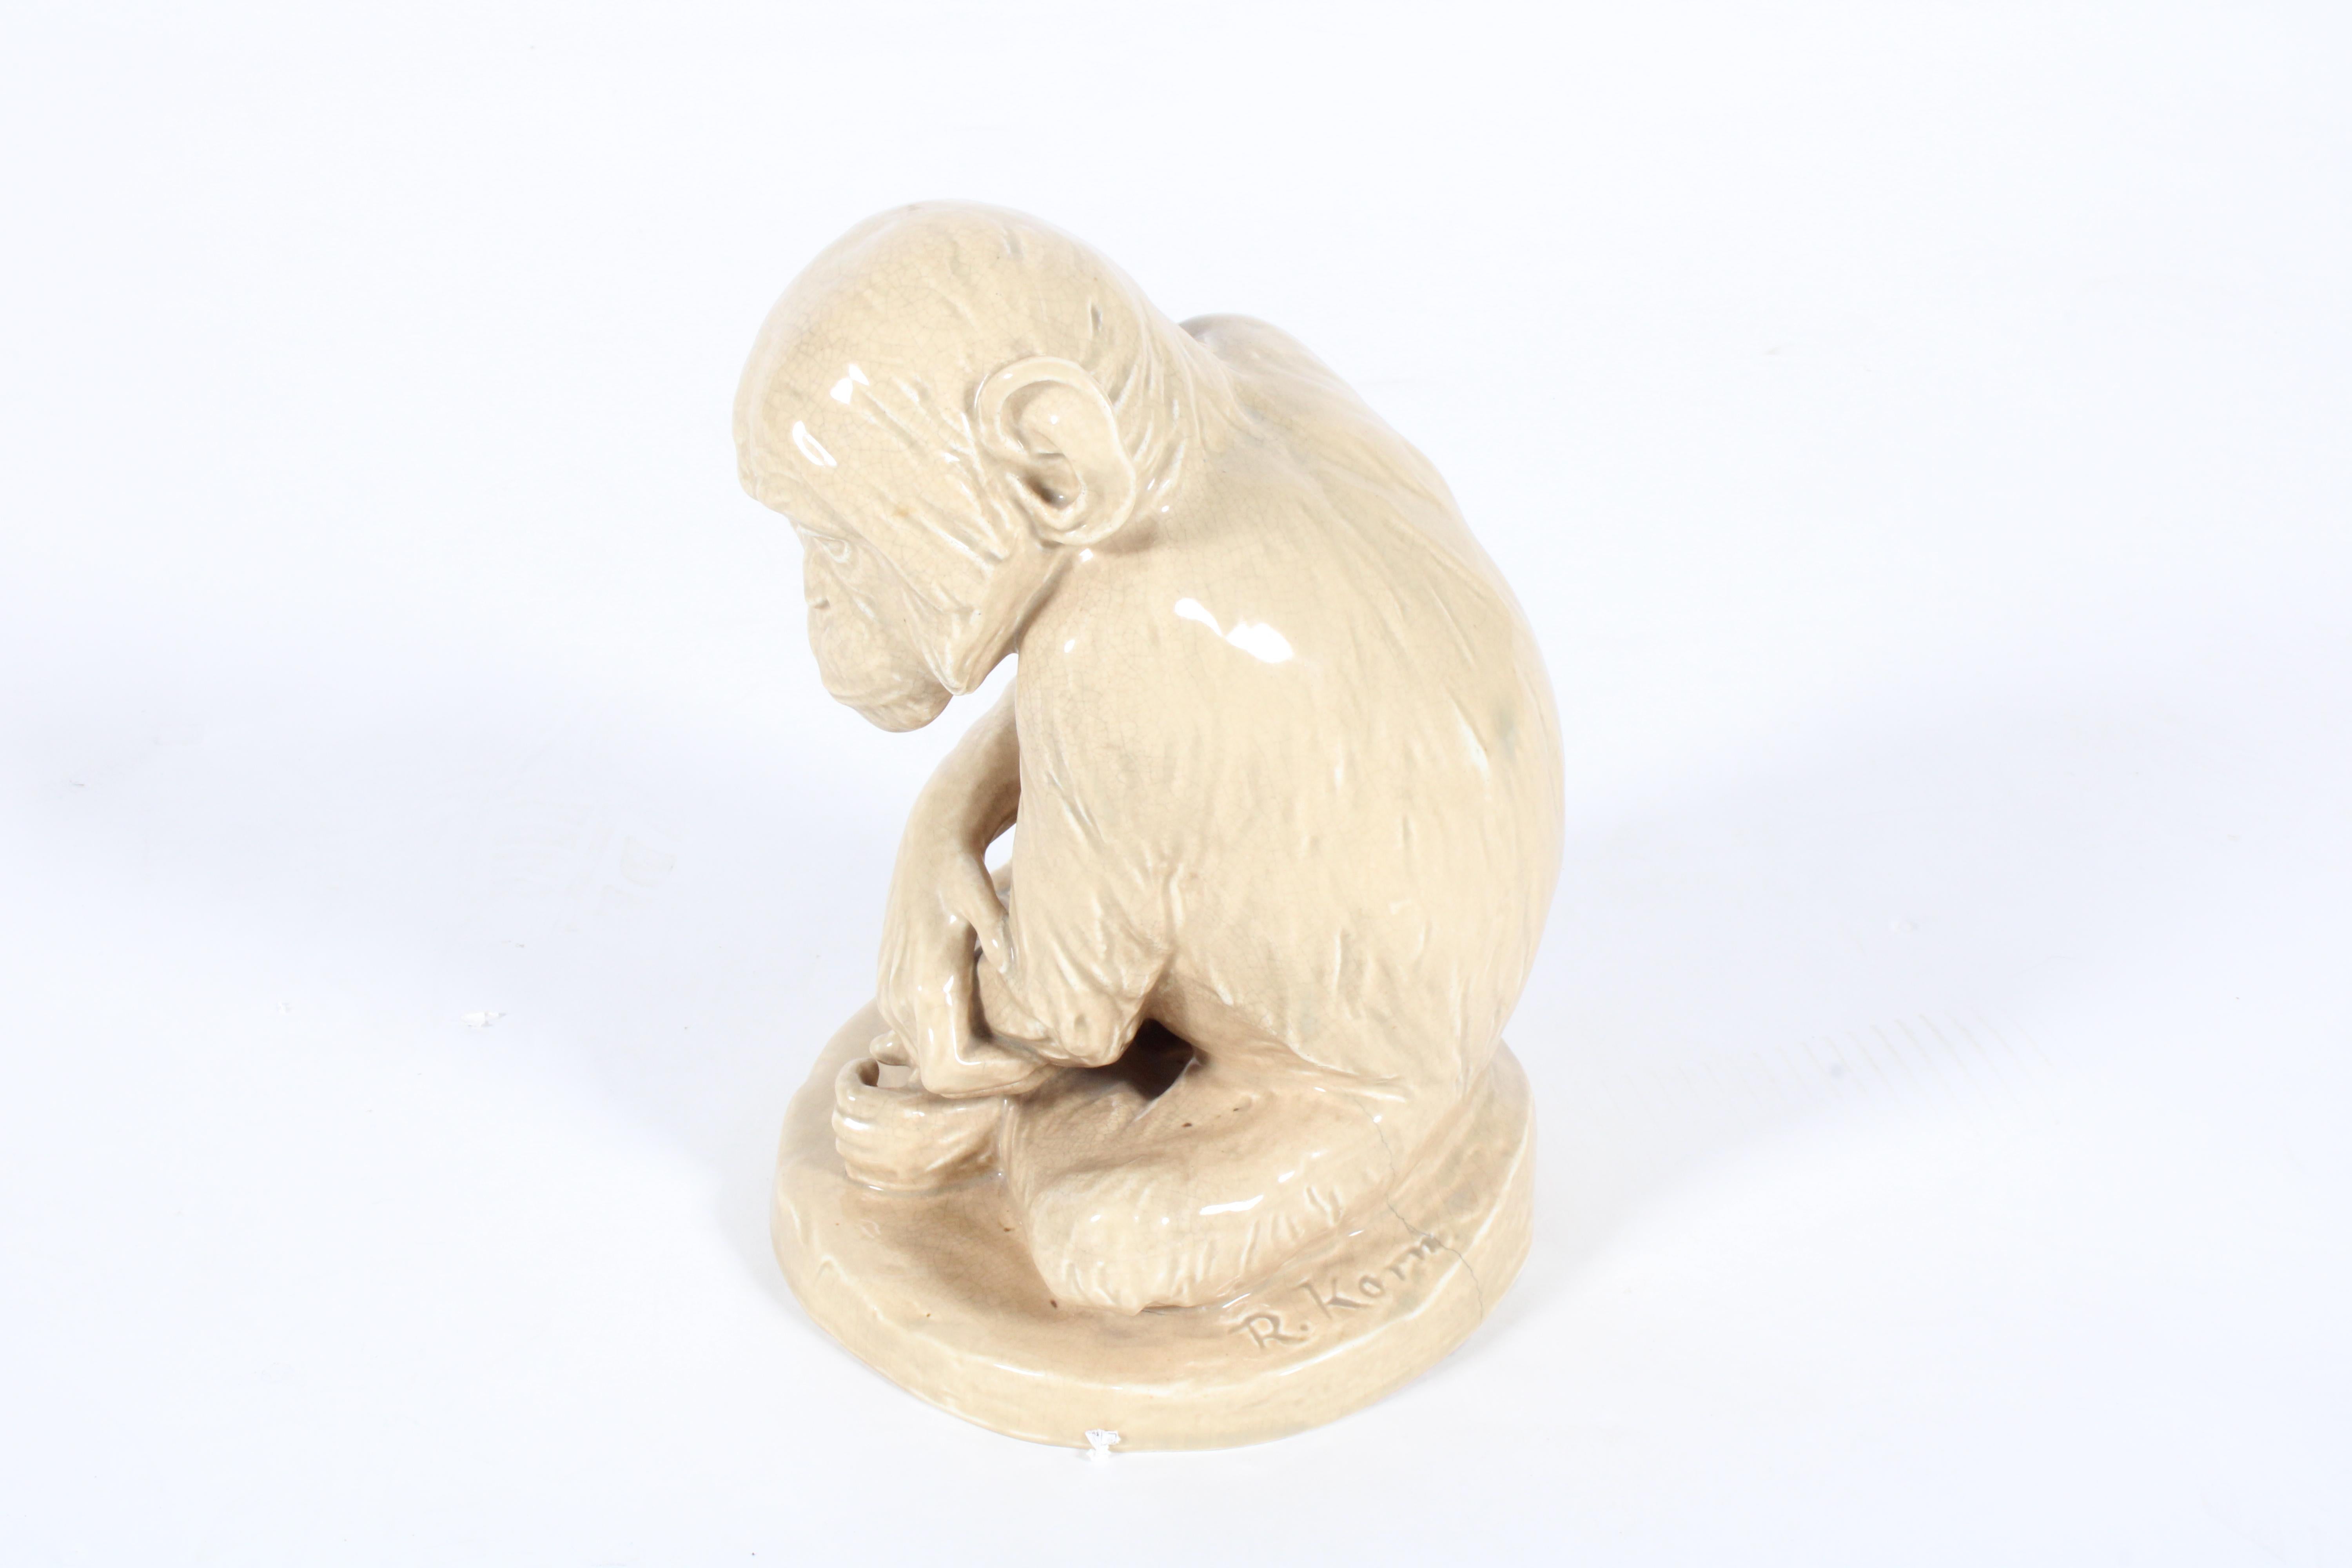 Charming Vintage Ceramic In The Form Of A Chimpanzee  *Free Worldwide Shipping 12